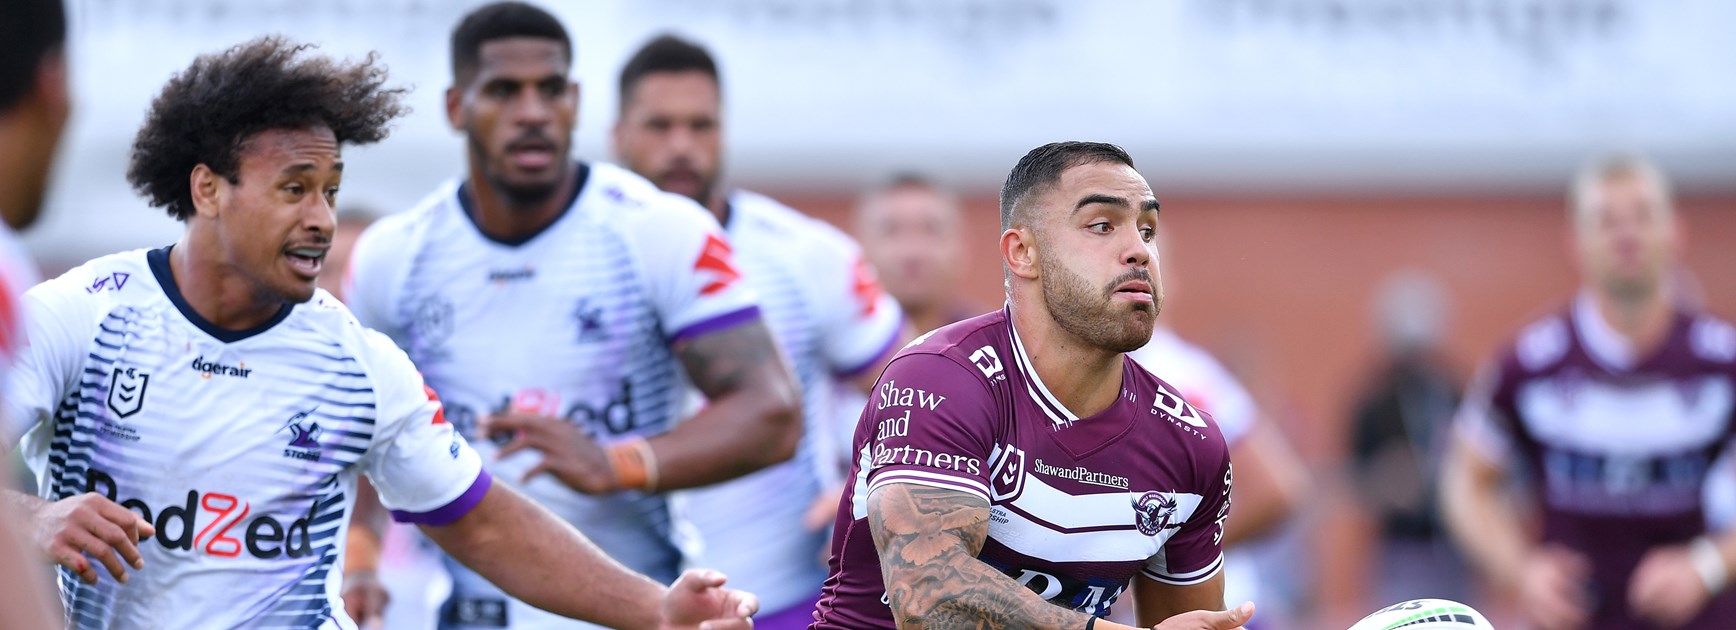 Sea Eagles lose 18-4 to Storm at Lottoland